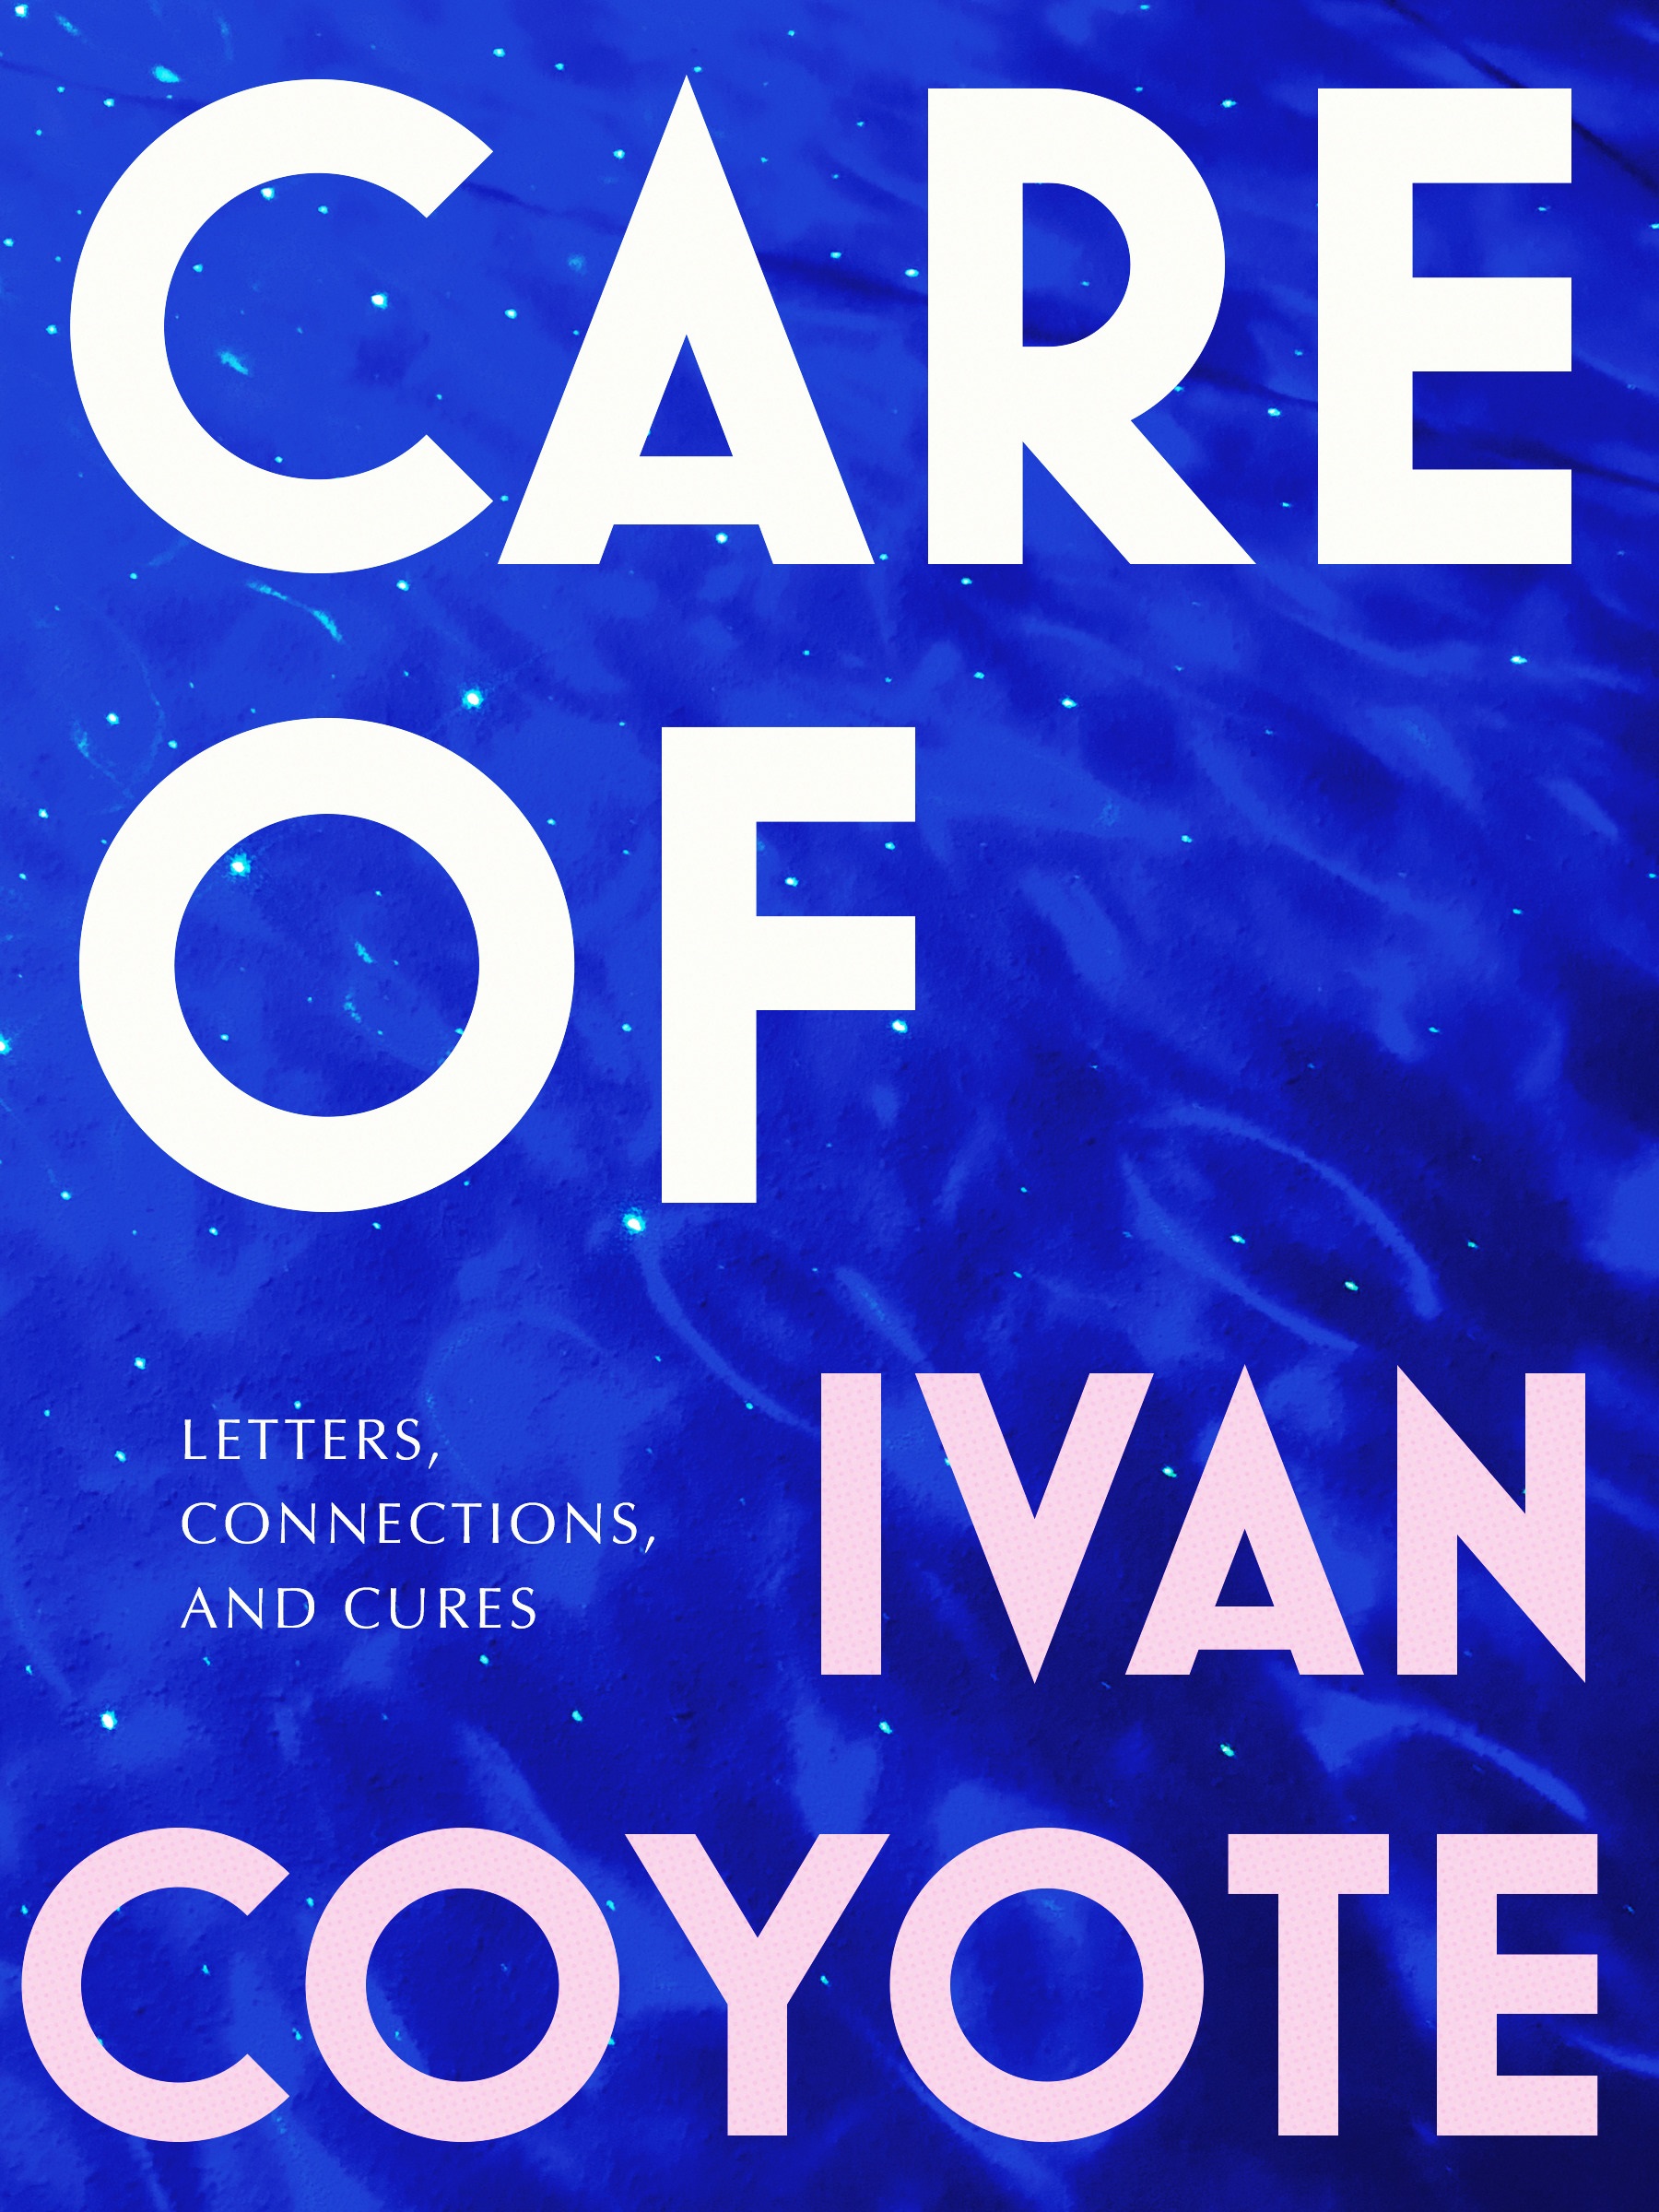 Ivan Coyote Care Of book cover